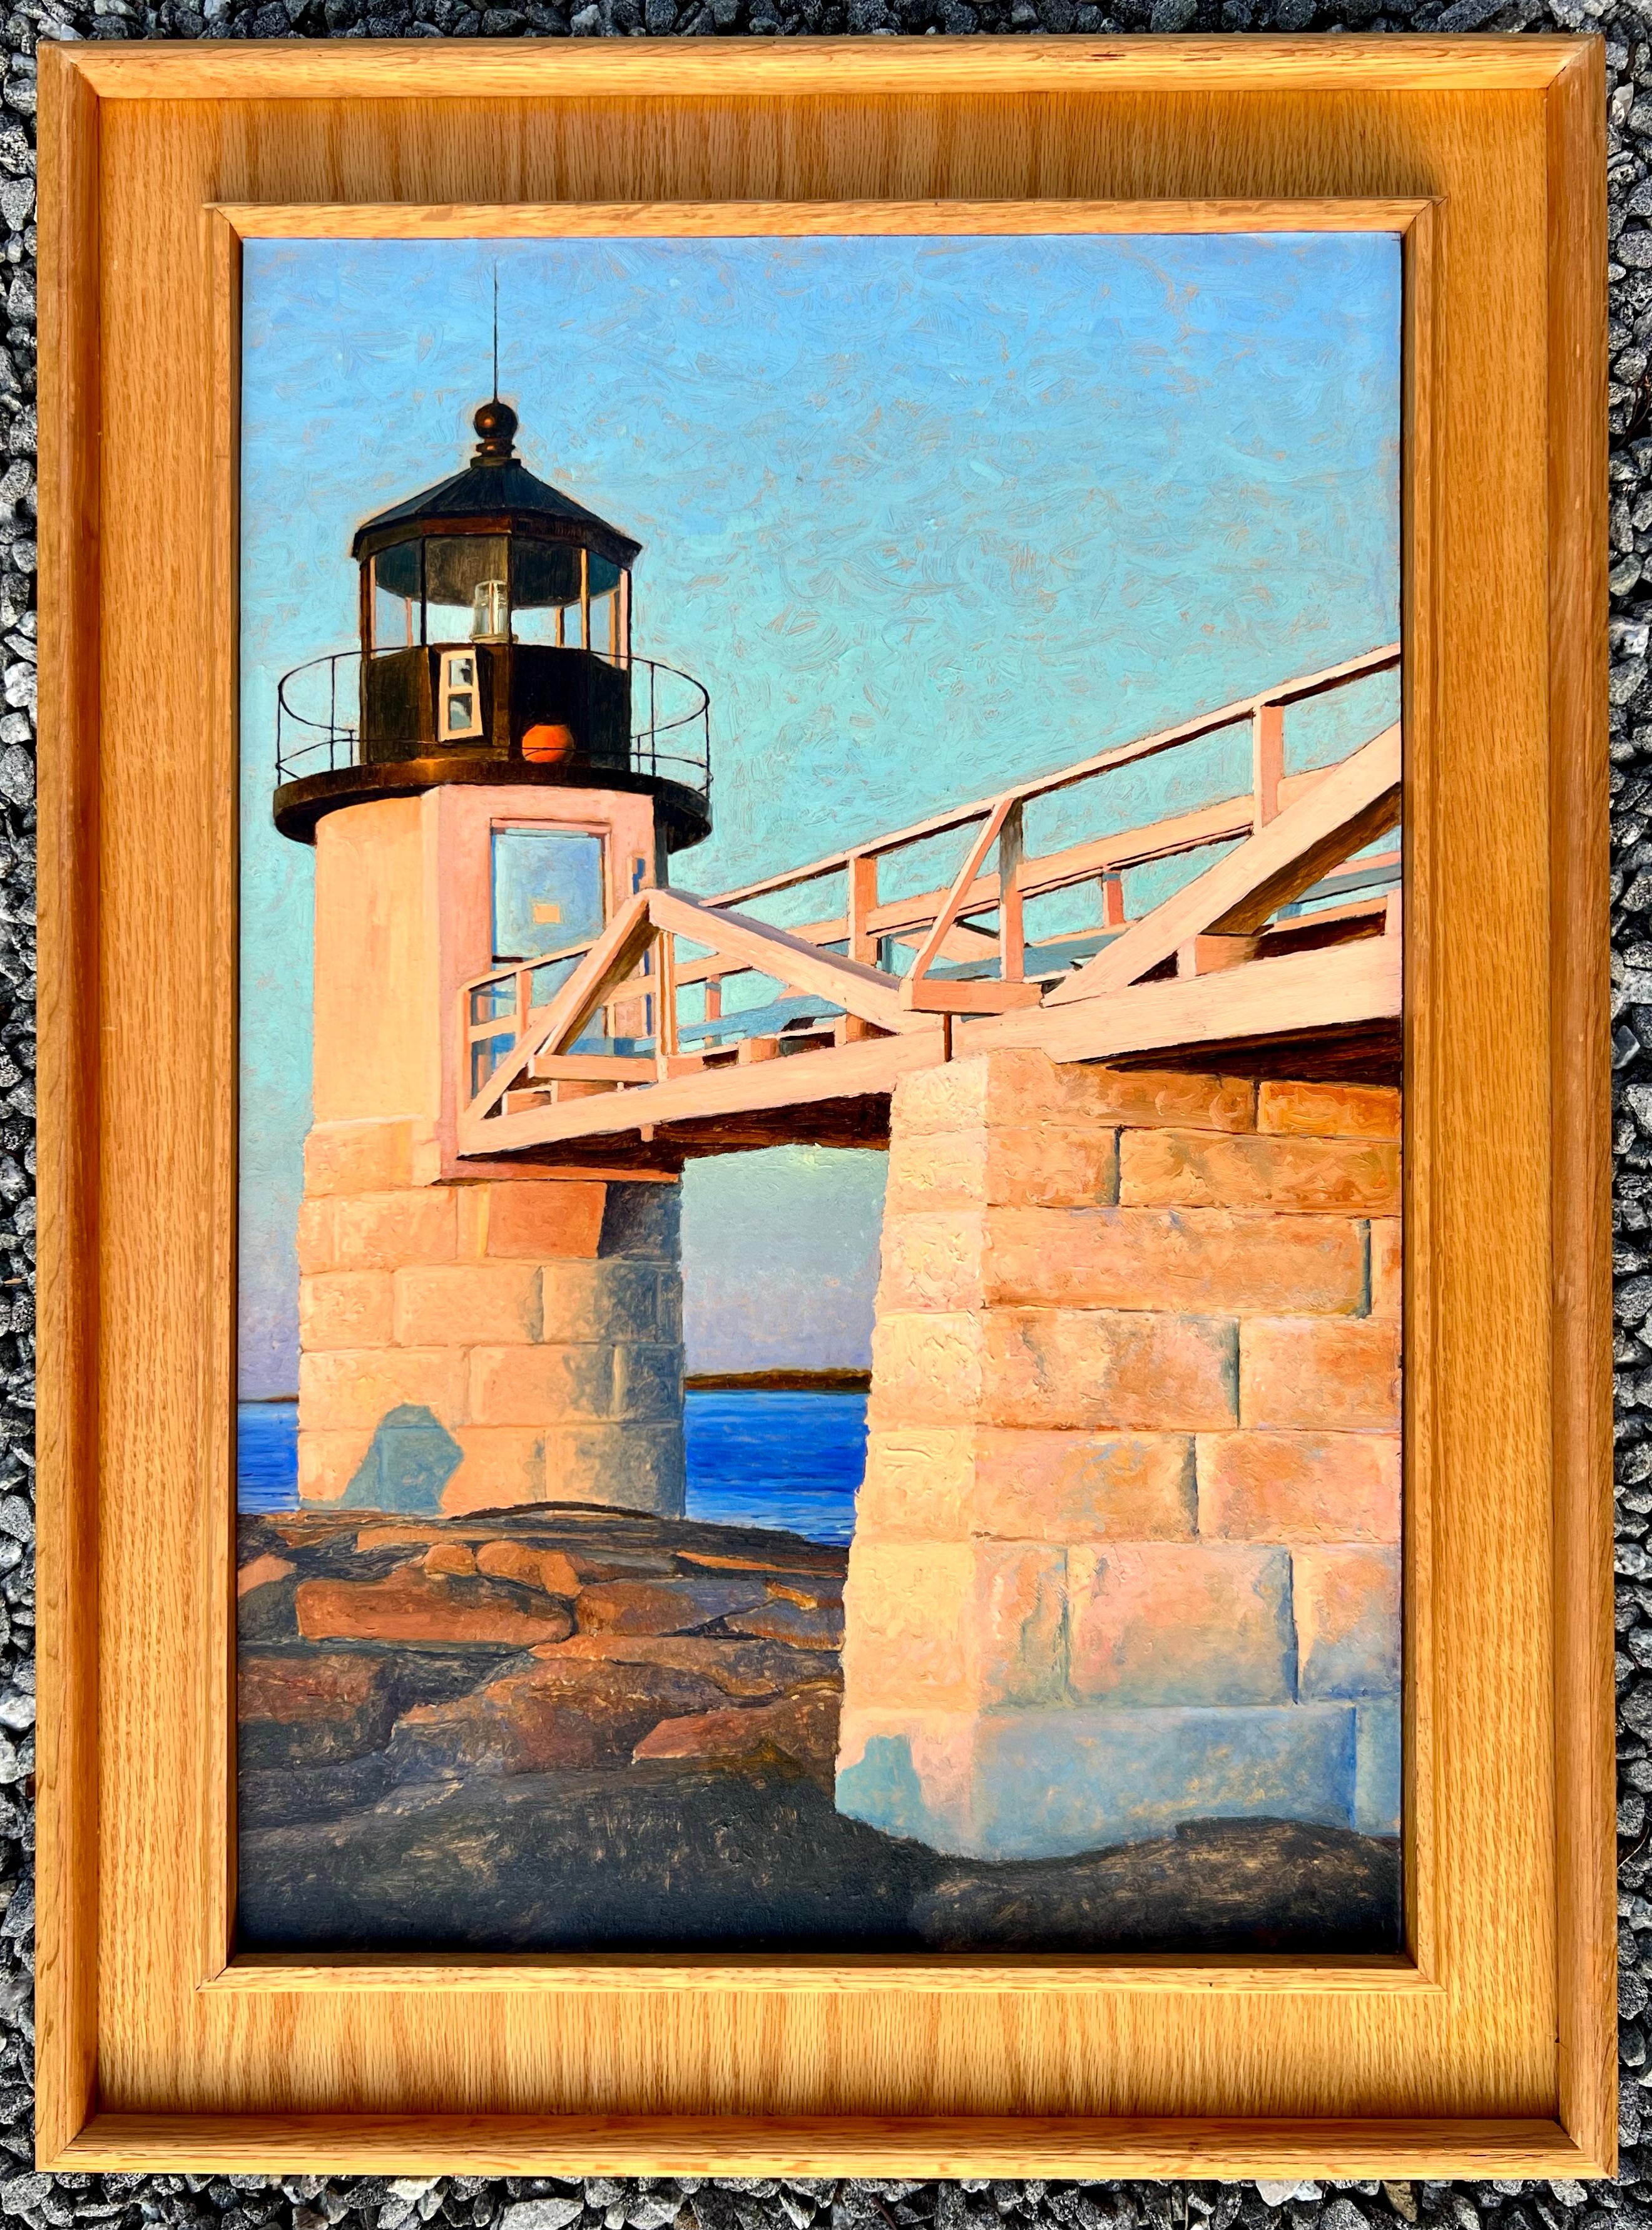 A luminous painting featuring a lighthouse at either sunrise or sunset by Peter Poskas.  Oil on panel signed in the lower right.  The dimensions include the frame.

Prominent 21th Century American landscape artist Peter Poskas has been painting New